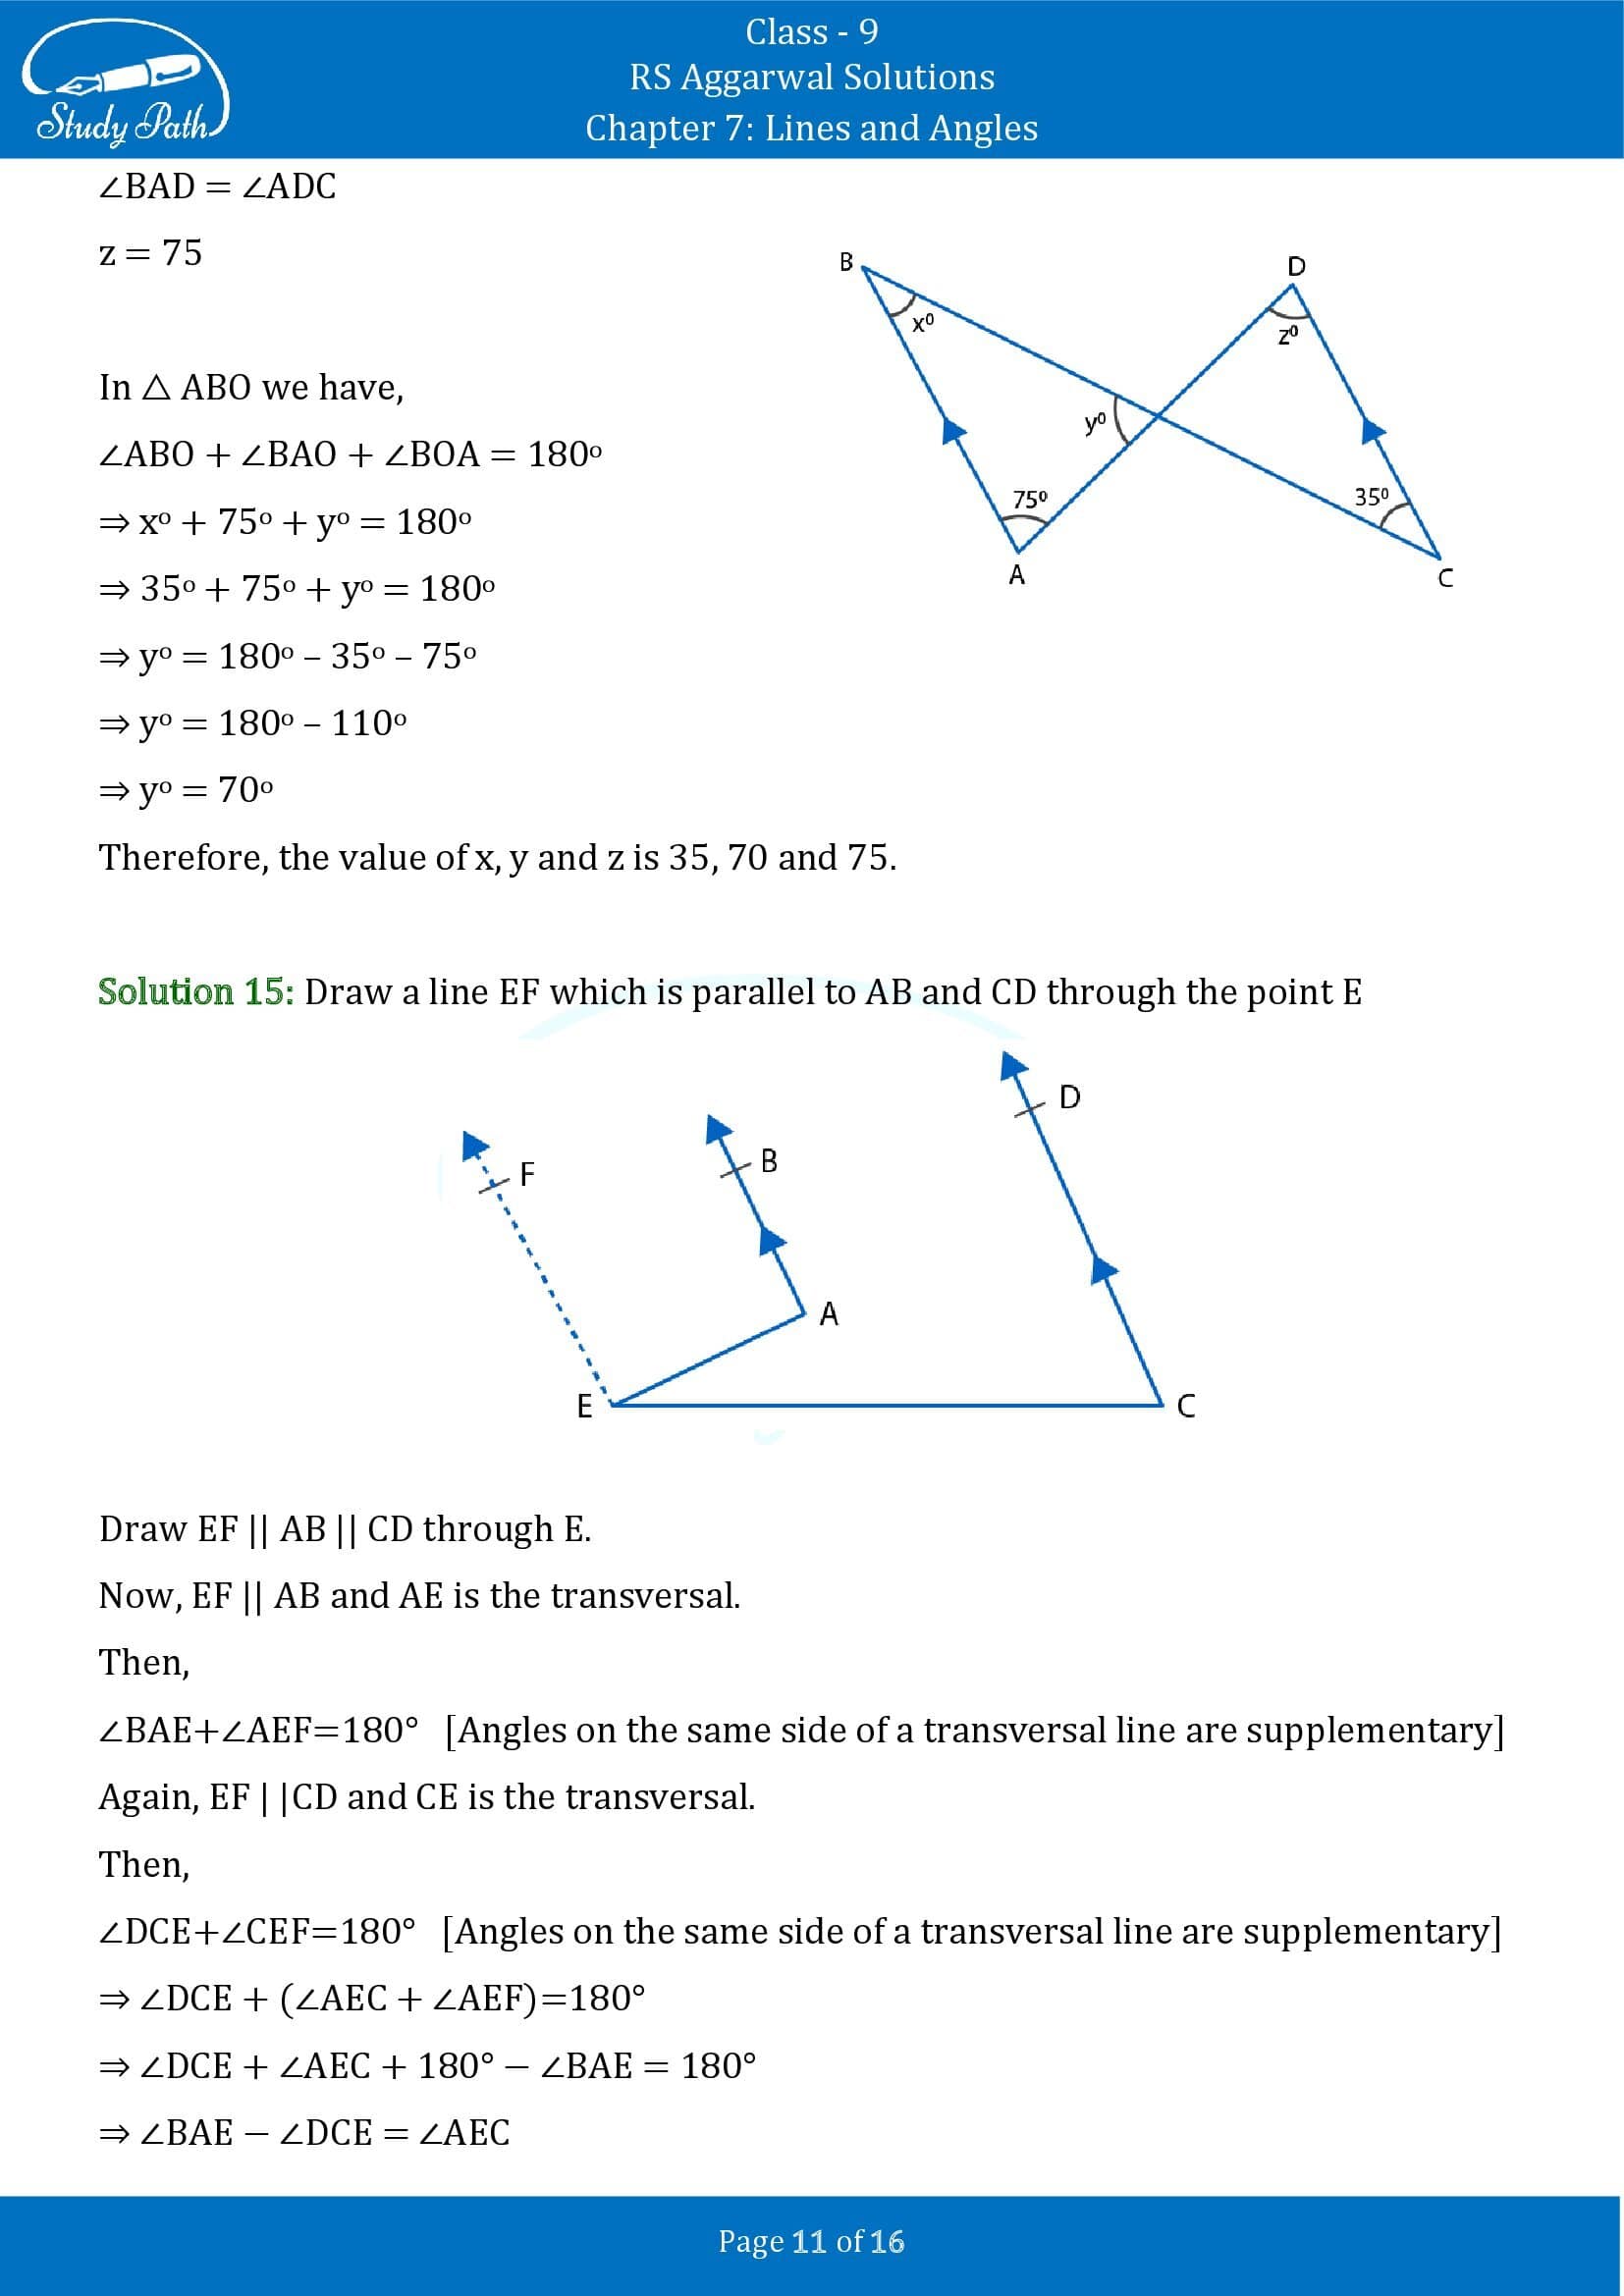 RS Aggarwal Solutions Class 9 Chapter 7 Lines and Angles Exercise 7C 00011